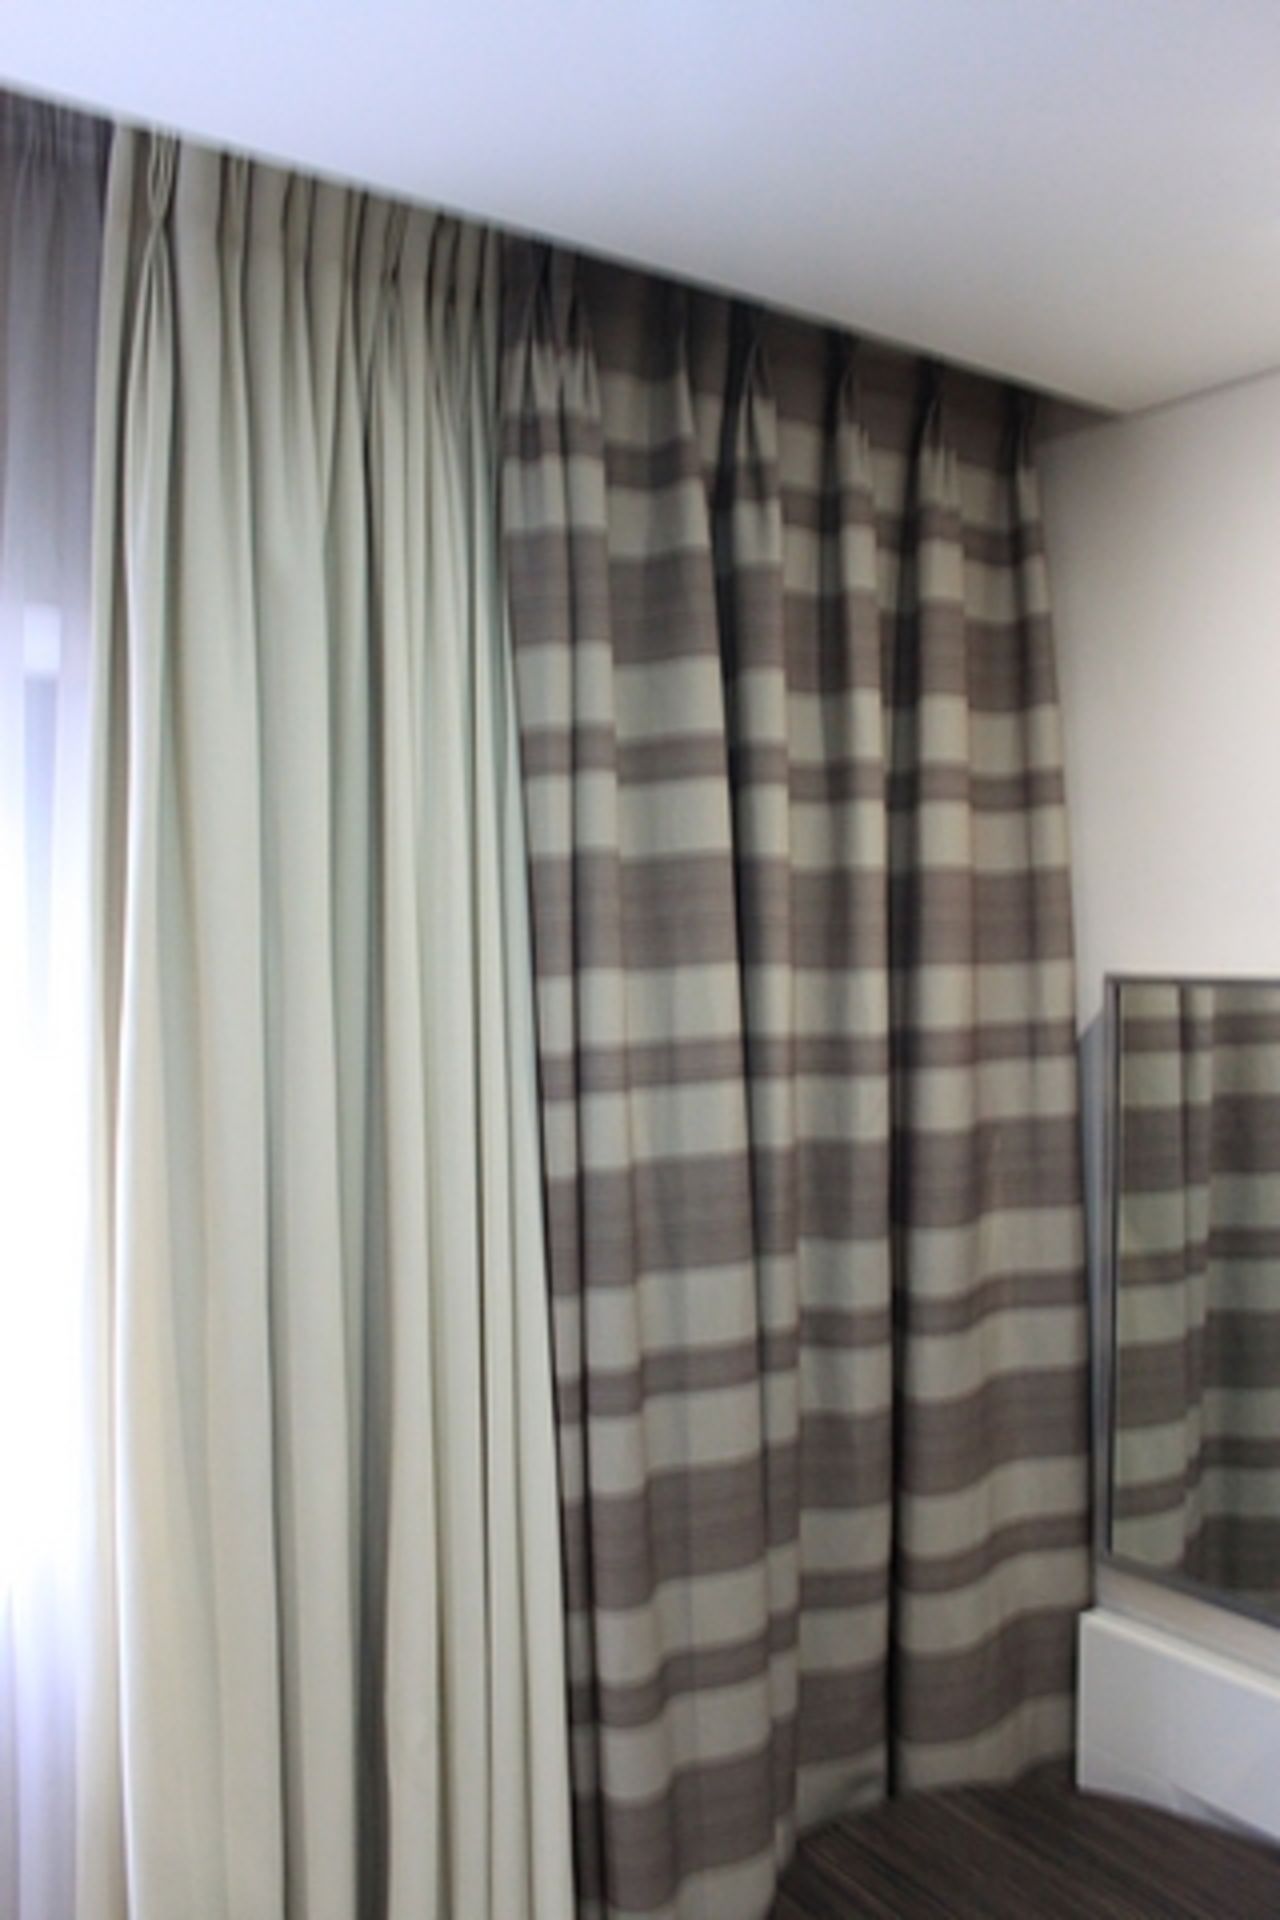 Sinclaire Fabrics a pair of drapes lined with blackout fabric spans 2000 x 2600mm (FM32AP1) - Image 2 of 4